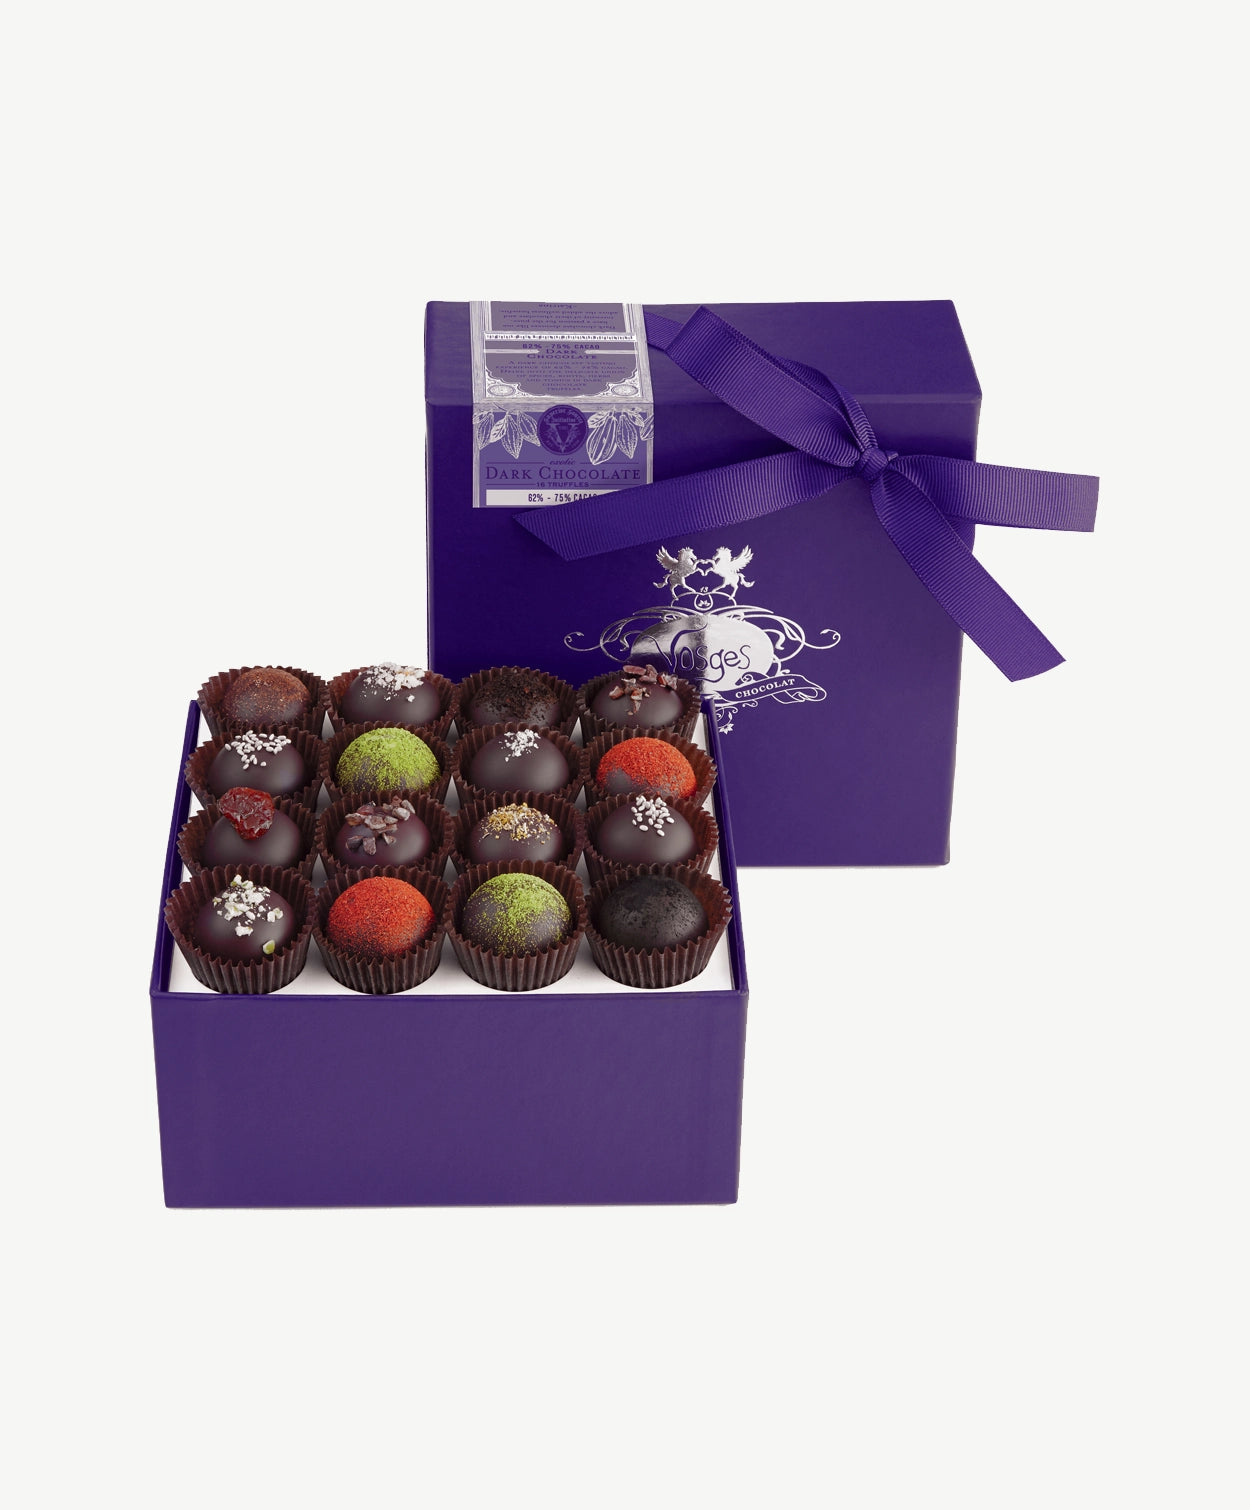 A purple candy box tied with a purple ribbon bow sits upright displaying sixteen dark chocolate truffles adorned in colorful toppings and chopped nuts on a light grey background.